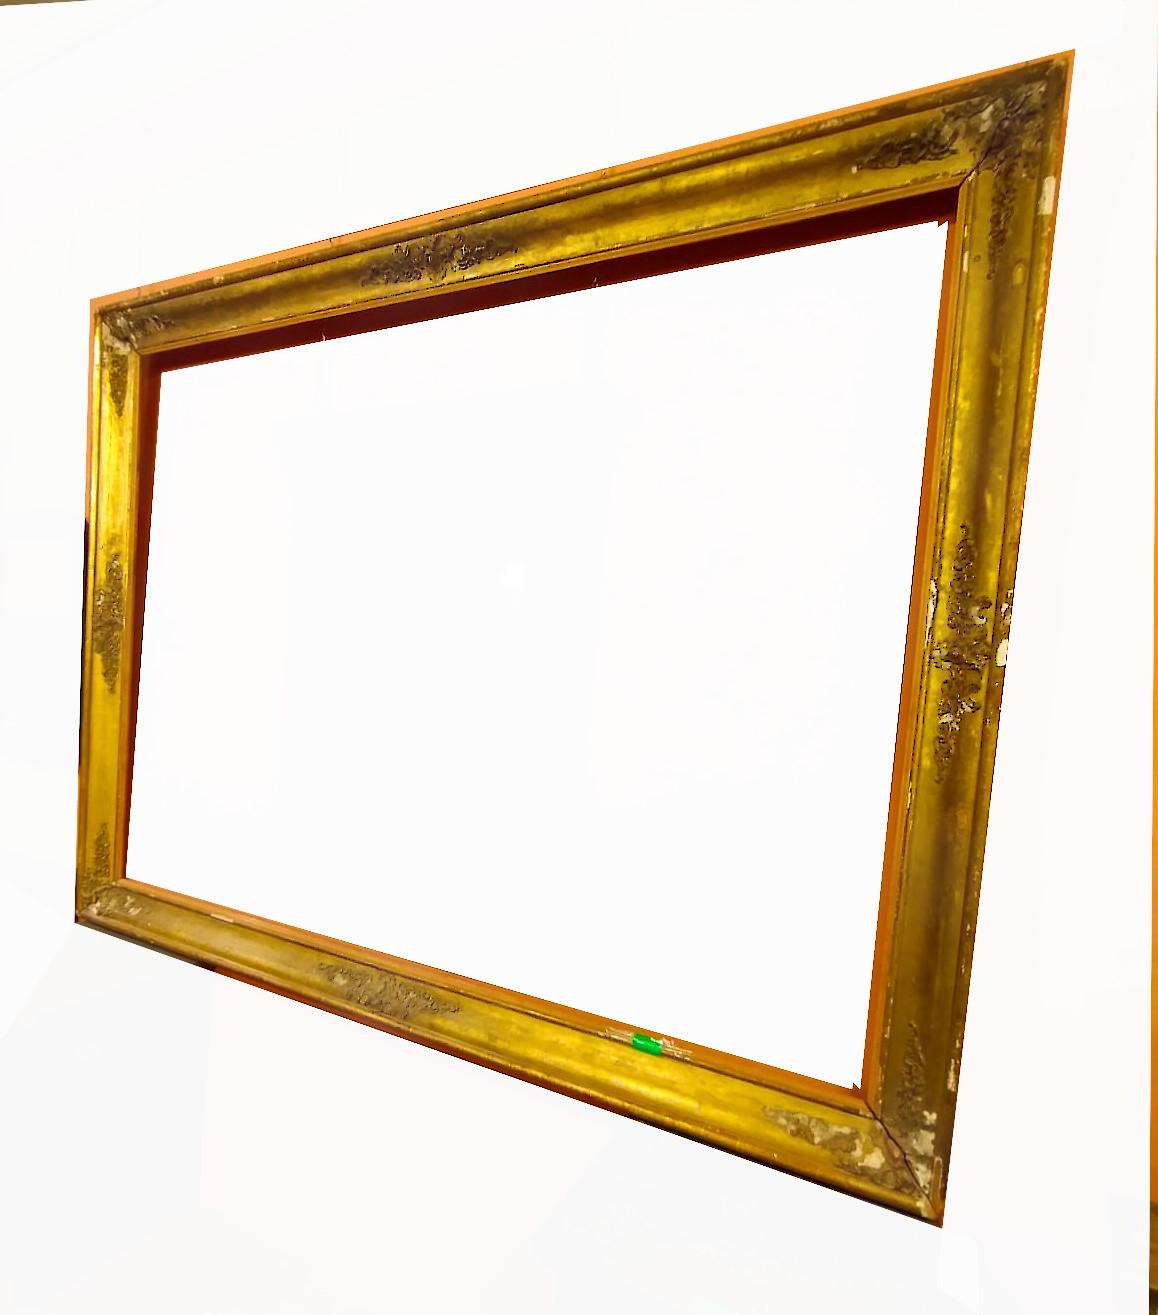 Large gilt frame from the second half of the 1800s; (c. 1880.)

The gilding was done with mixed techniques (gold leaf etc.) and the fine decorations are done in stucco.
Of European provenance, probably French.

Versatile furnishing item that